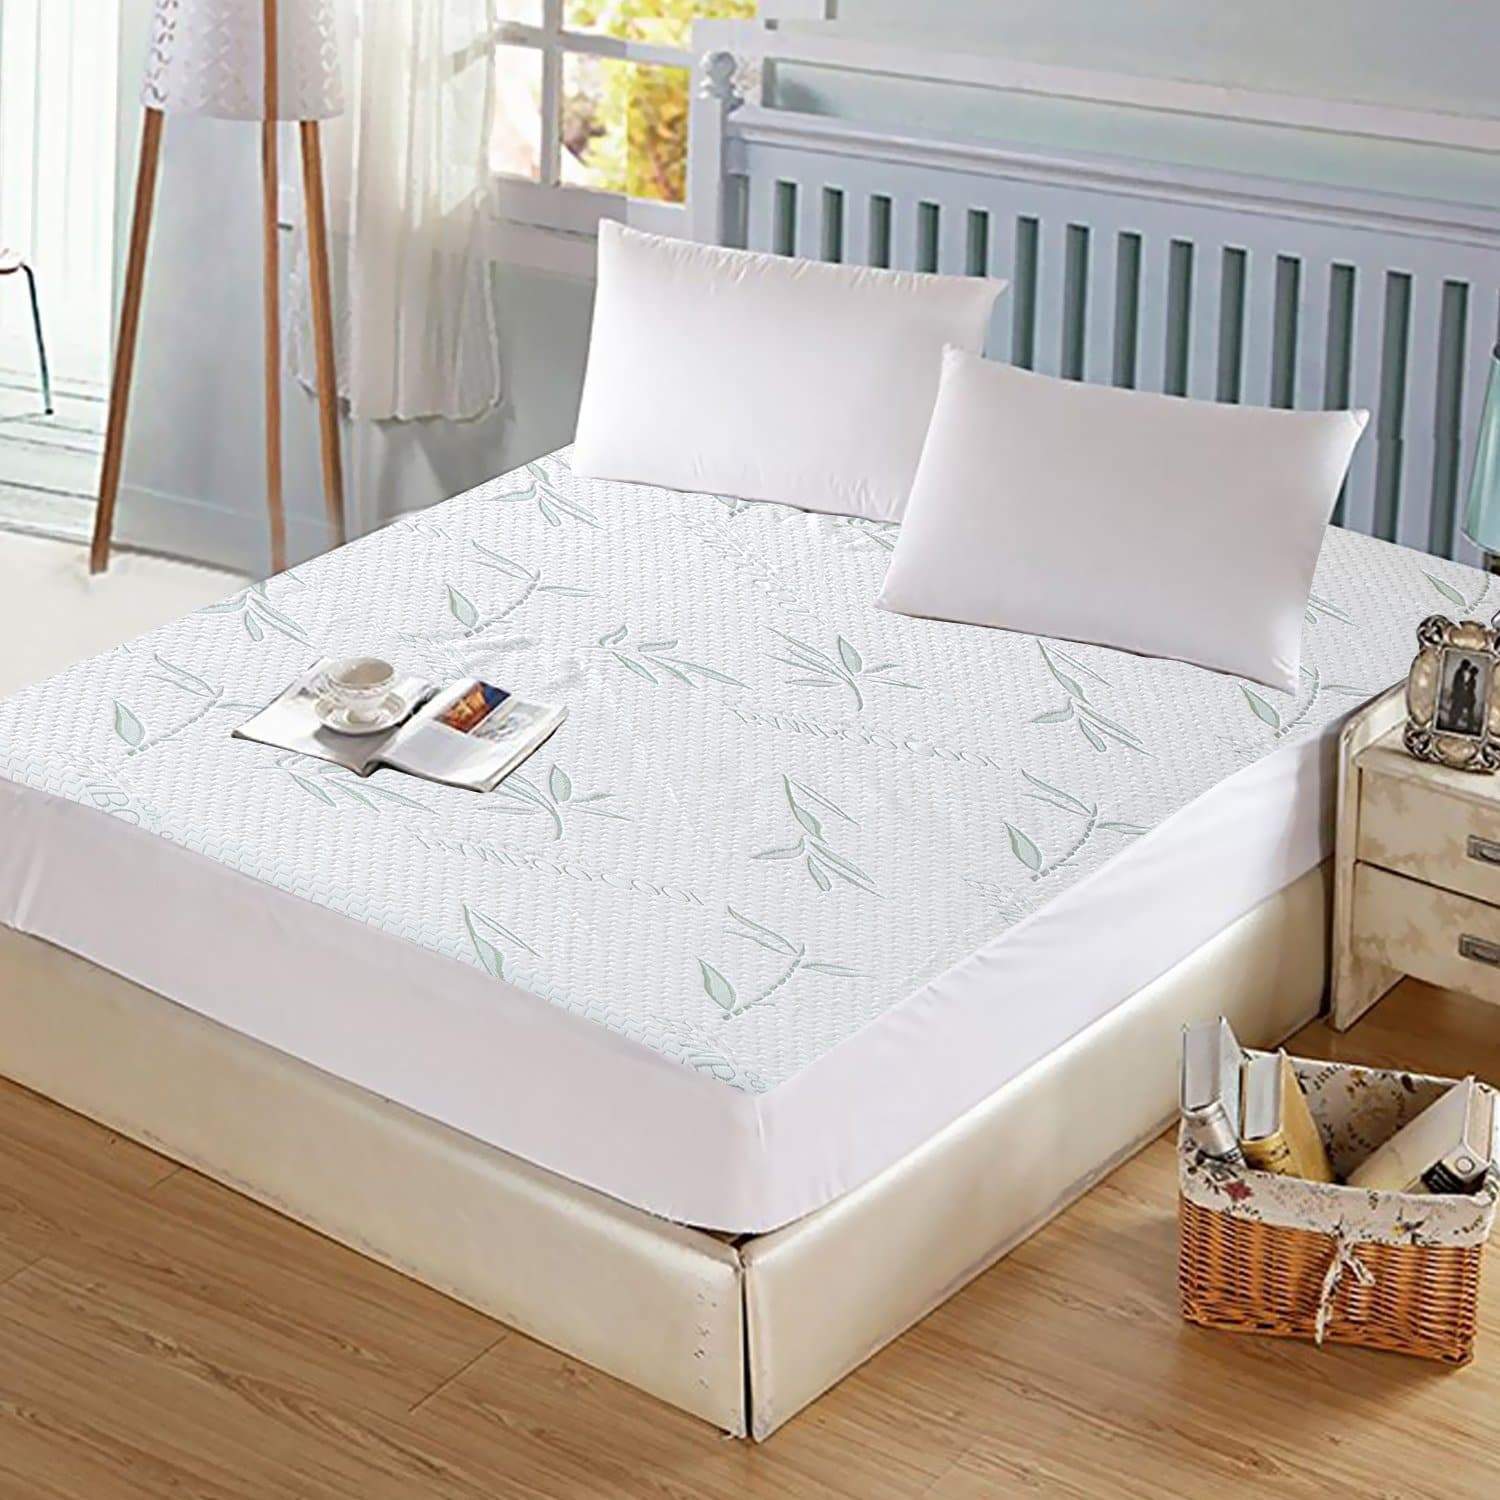 bedding Fitted Waterproof Bed Mattress Protectors Covers Single